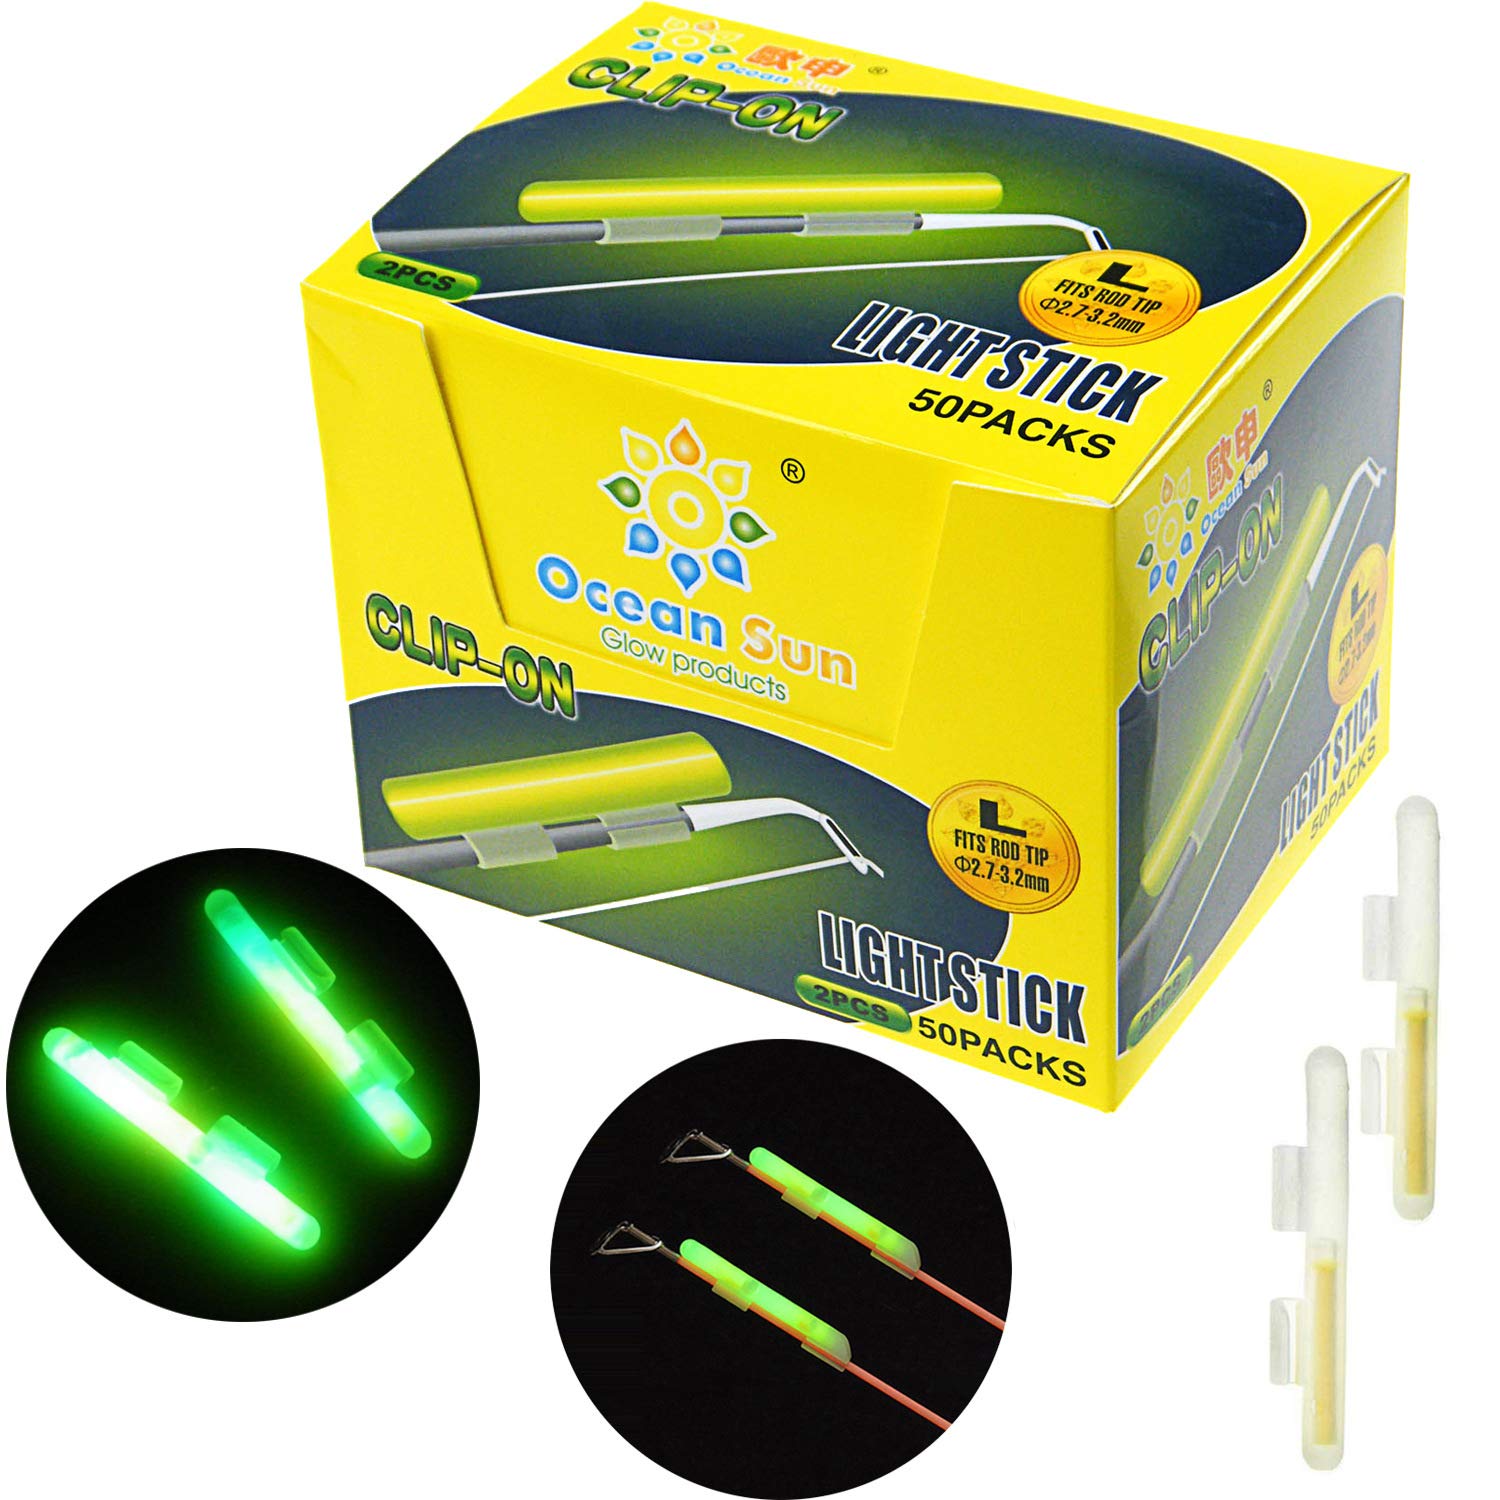 Fishing Rod Floats Glow Sticks - Floating Fishing Lights - Battery Operated  Night Fishing Rod Tip Light (5pcs, Color As Shown)